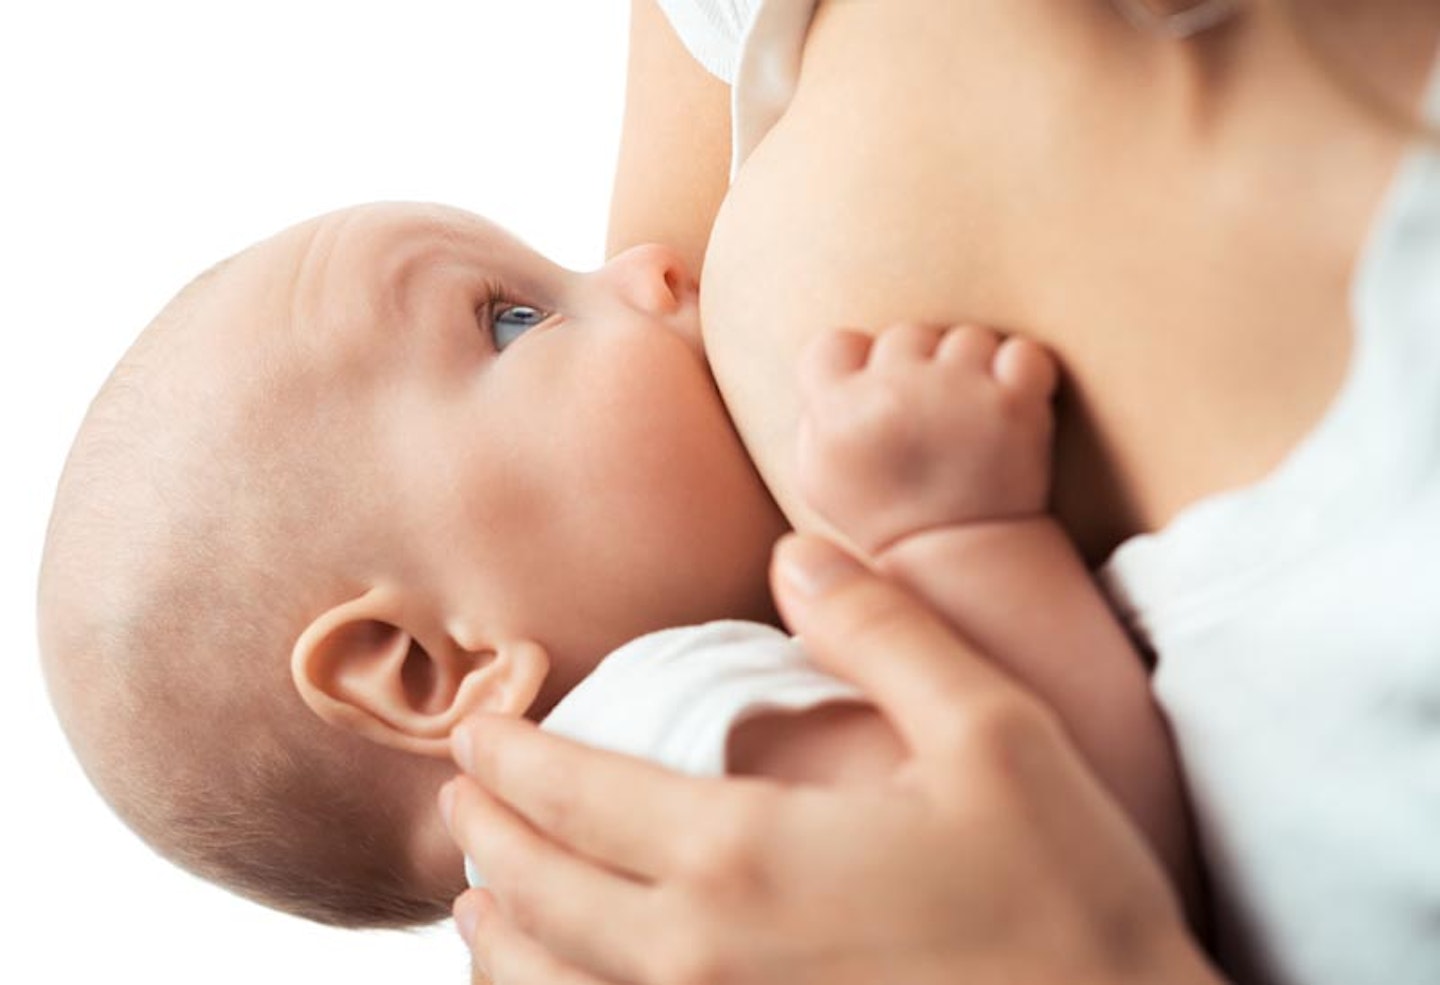 How long should you breastfeed for?